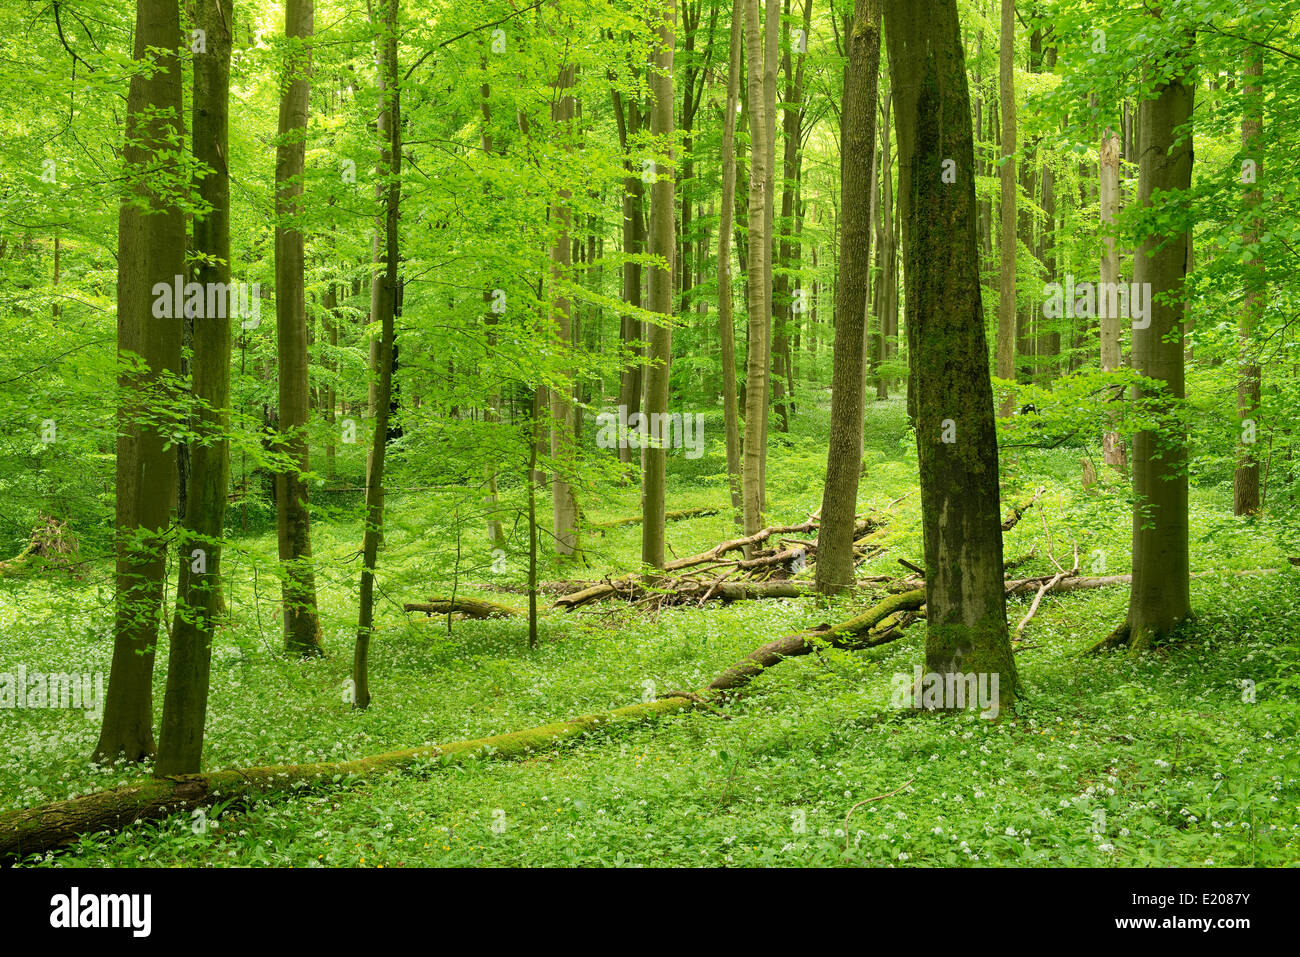 European Beech or Common Beech forest (Fagus sylvatica) in spring, Hainich National Park, Thuringia, Germany Stock Photo